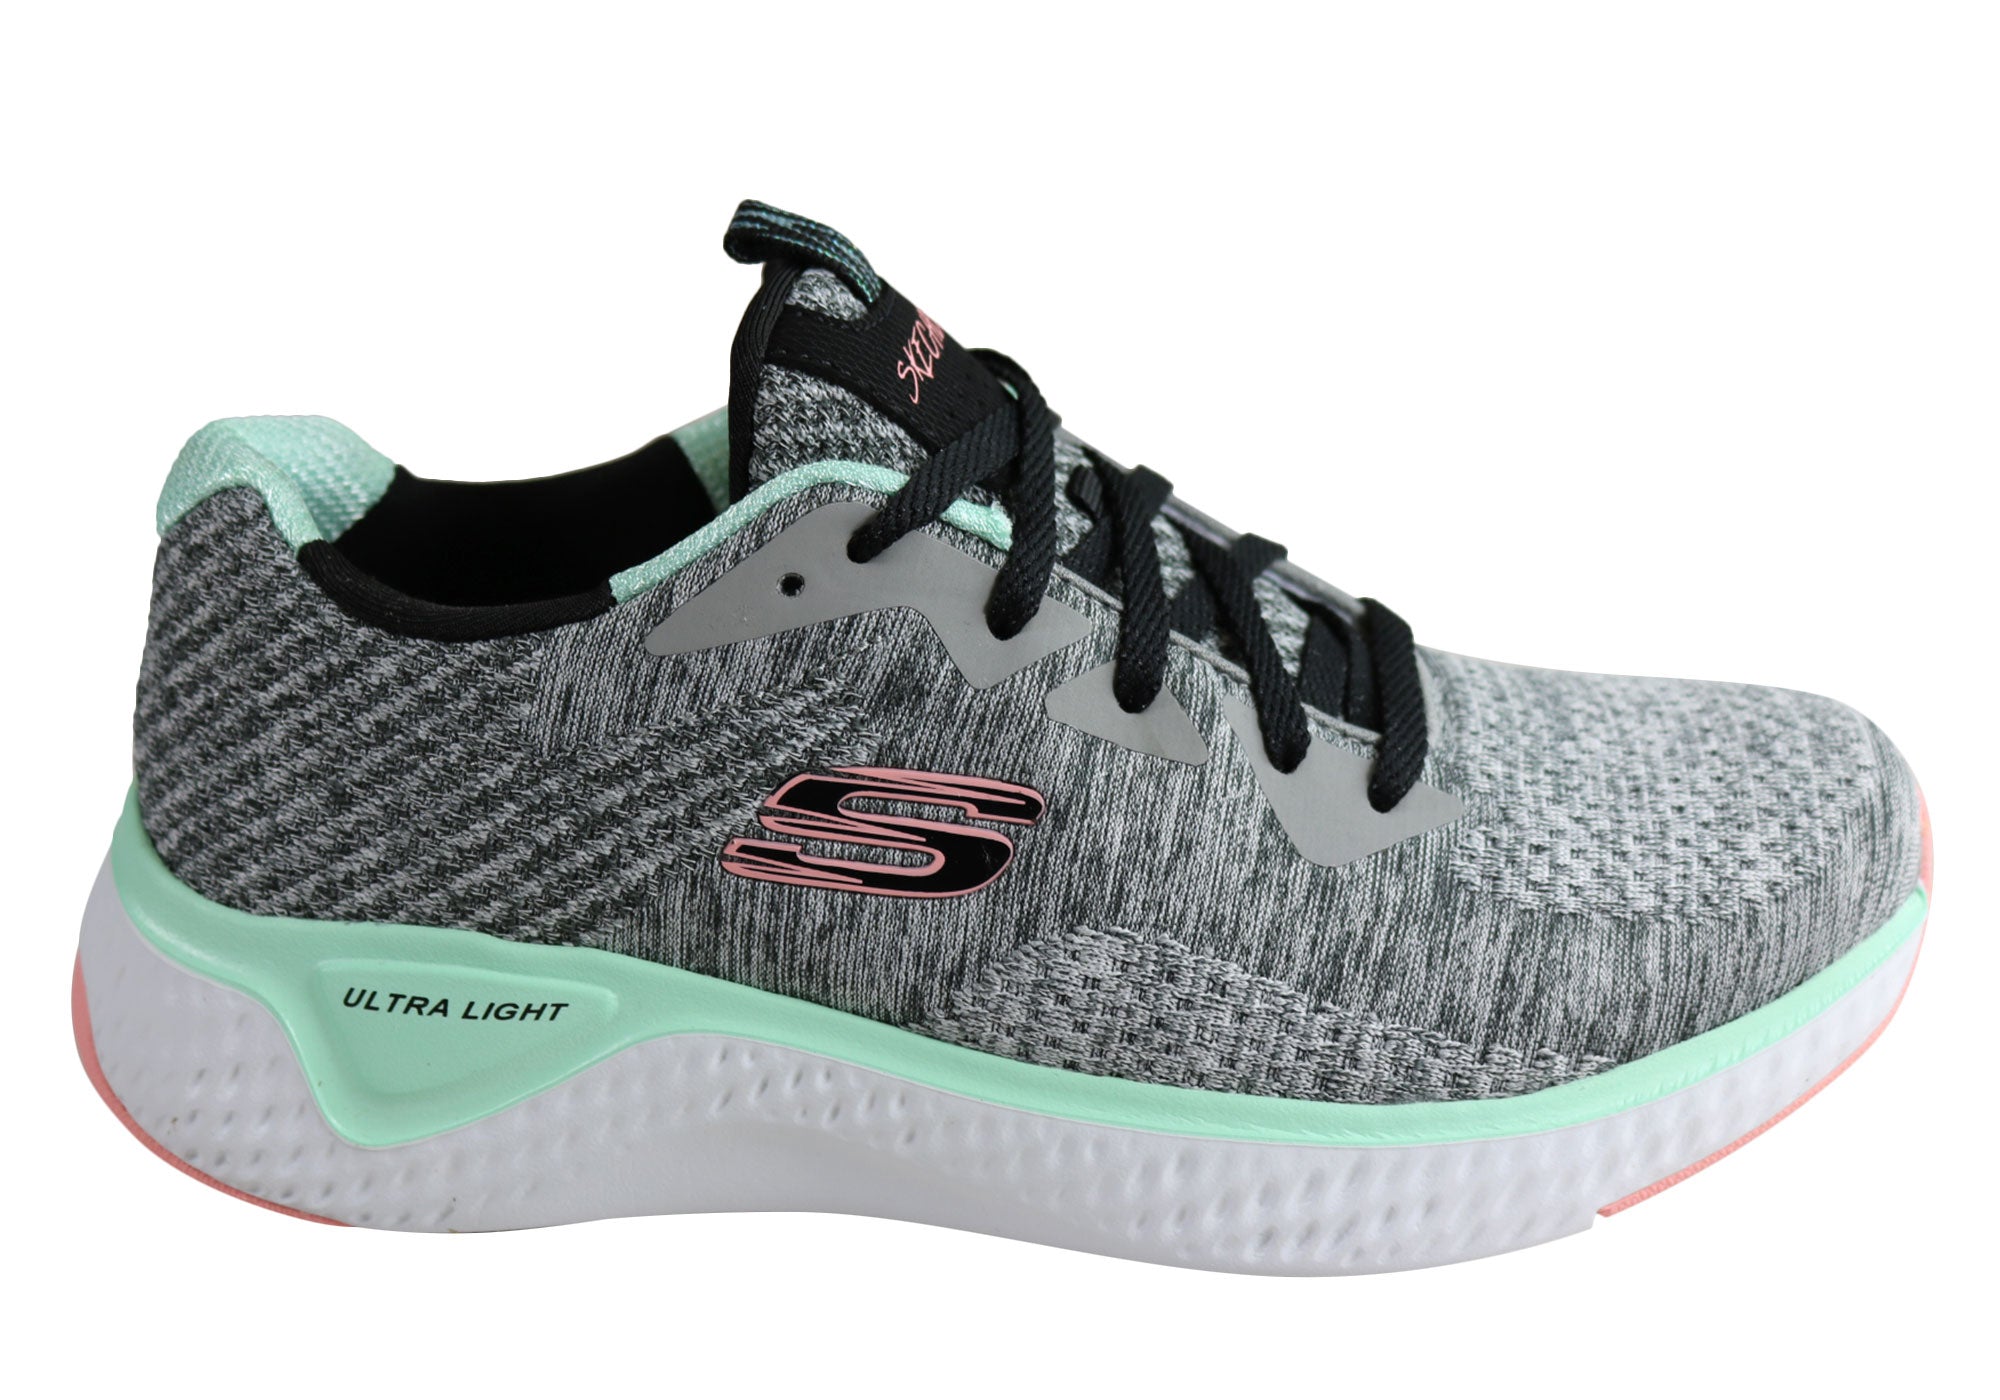 sketcher tennis shoes with memory foam